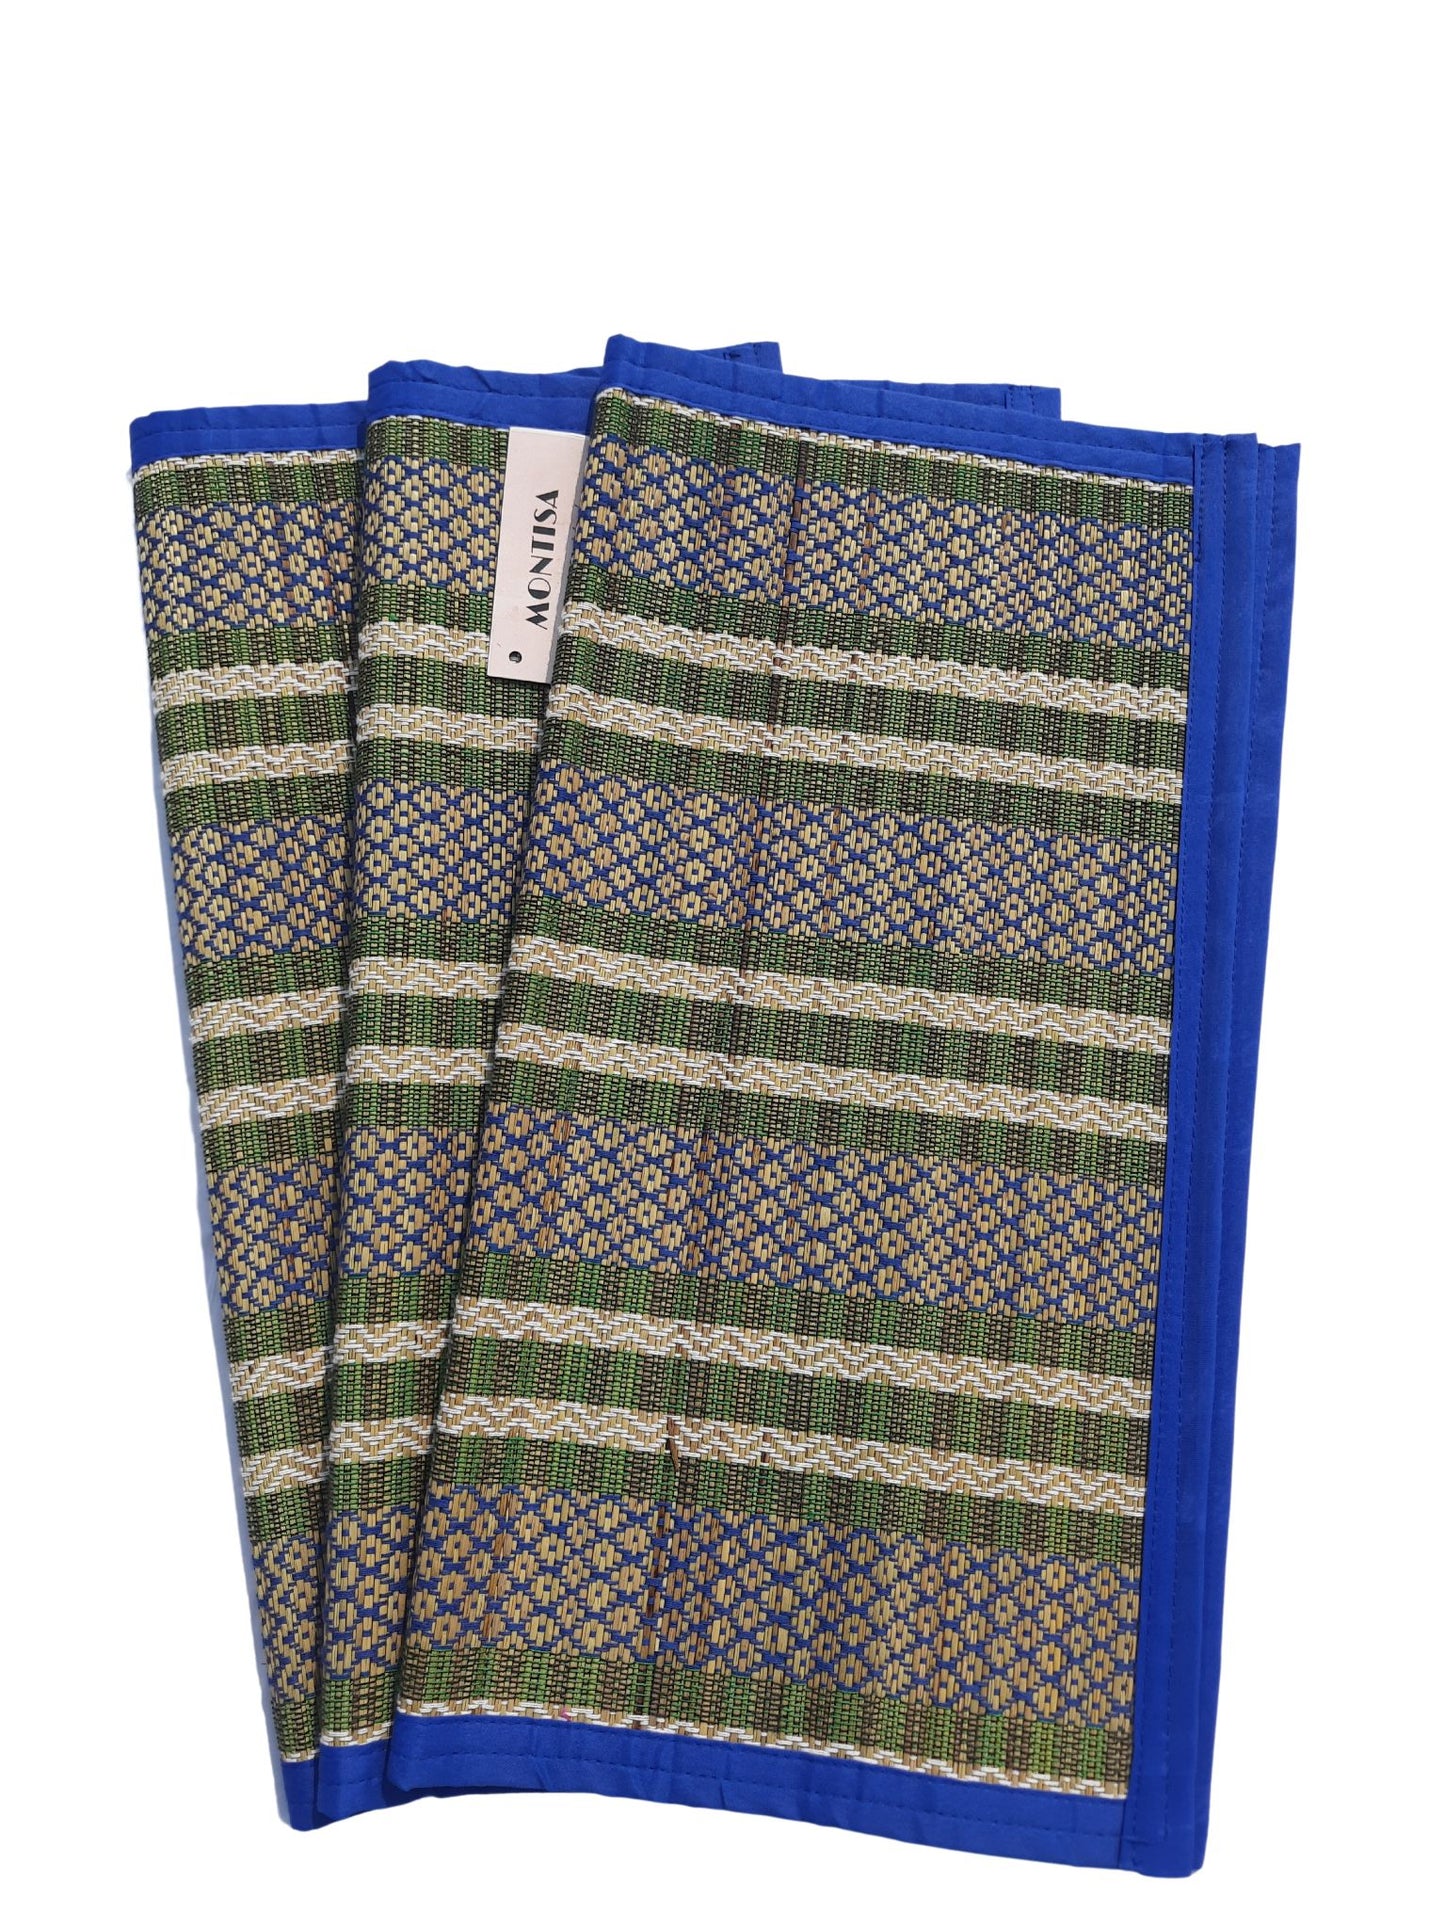 Puja mats for sitting natural grass mat for prayer handwoven asan blue, 18x18 inches square shape holy alternative to cotton  puja aasan T3-42